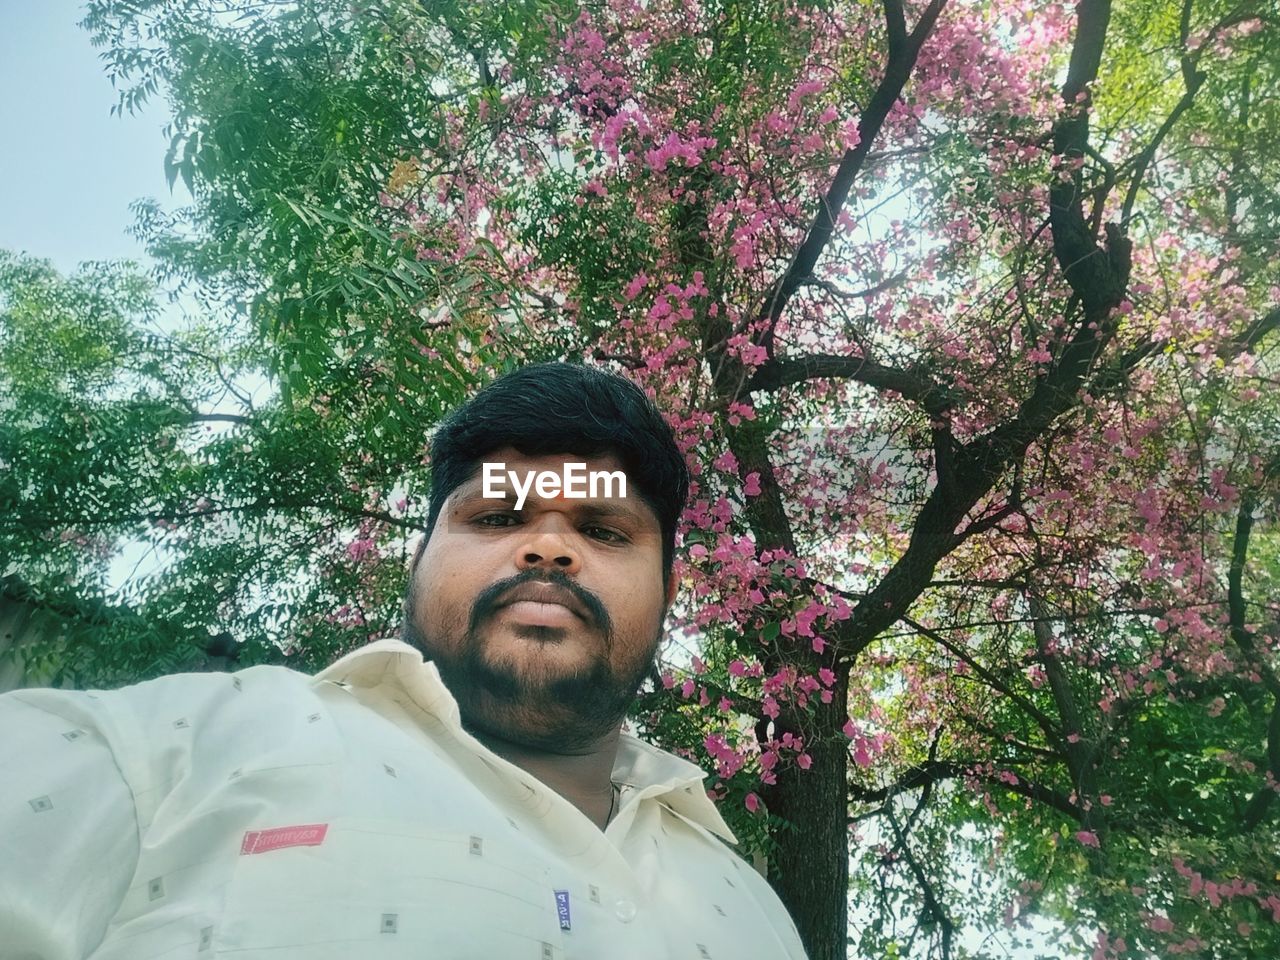 plant, one person, tree, flower, spring, portrait, nature, men, growth, beard, adult, front view, facial hair, headshot, young adult, low angle view, day, flowering plant, lifestyles, standing, leisure activity, beauty in nature, outdoors, waist up, looking at camera, casual clothing, person, looking, blossom, branch, freshness